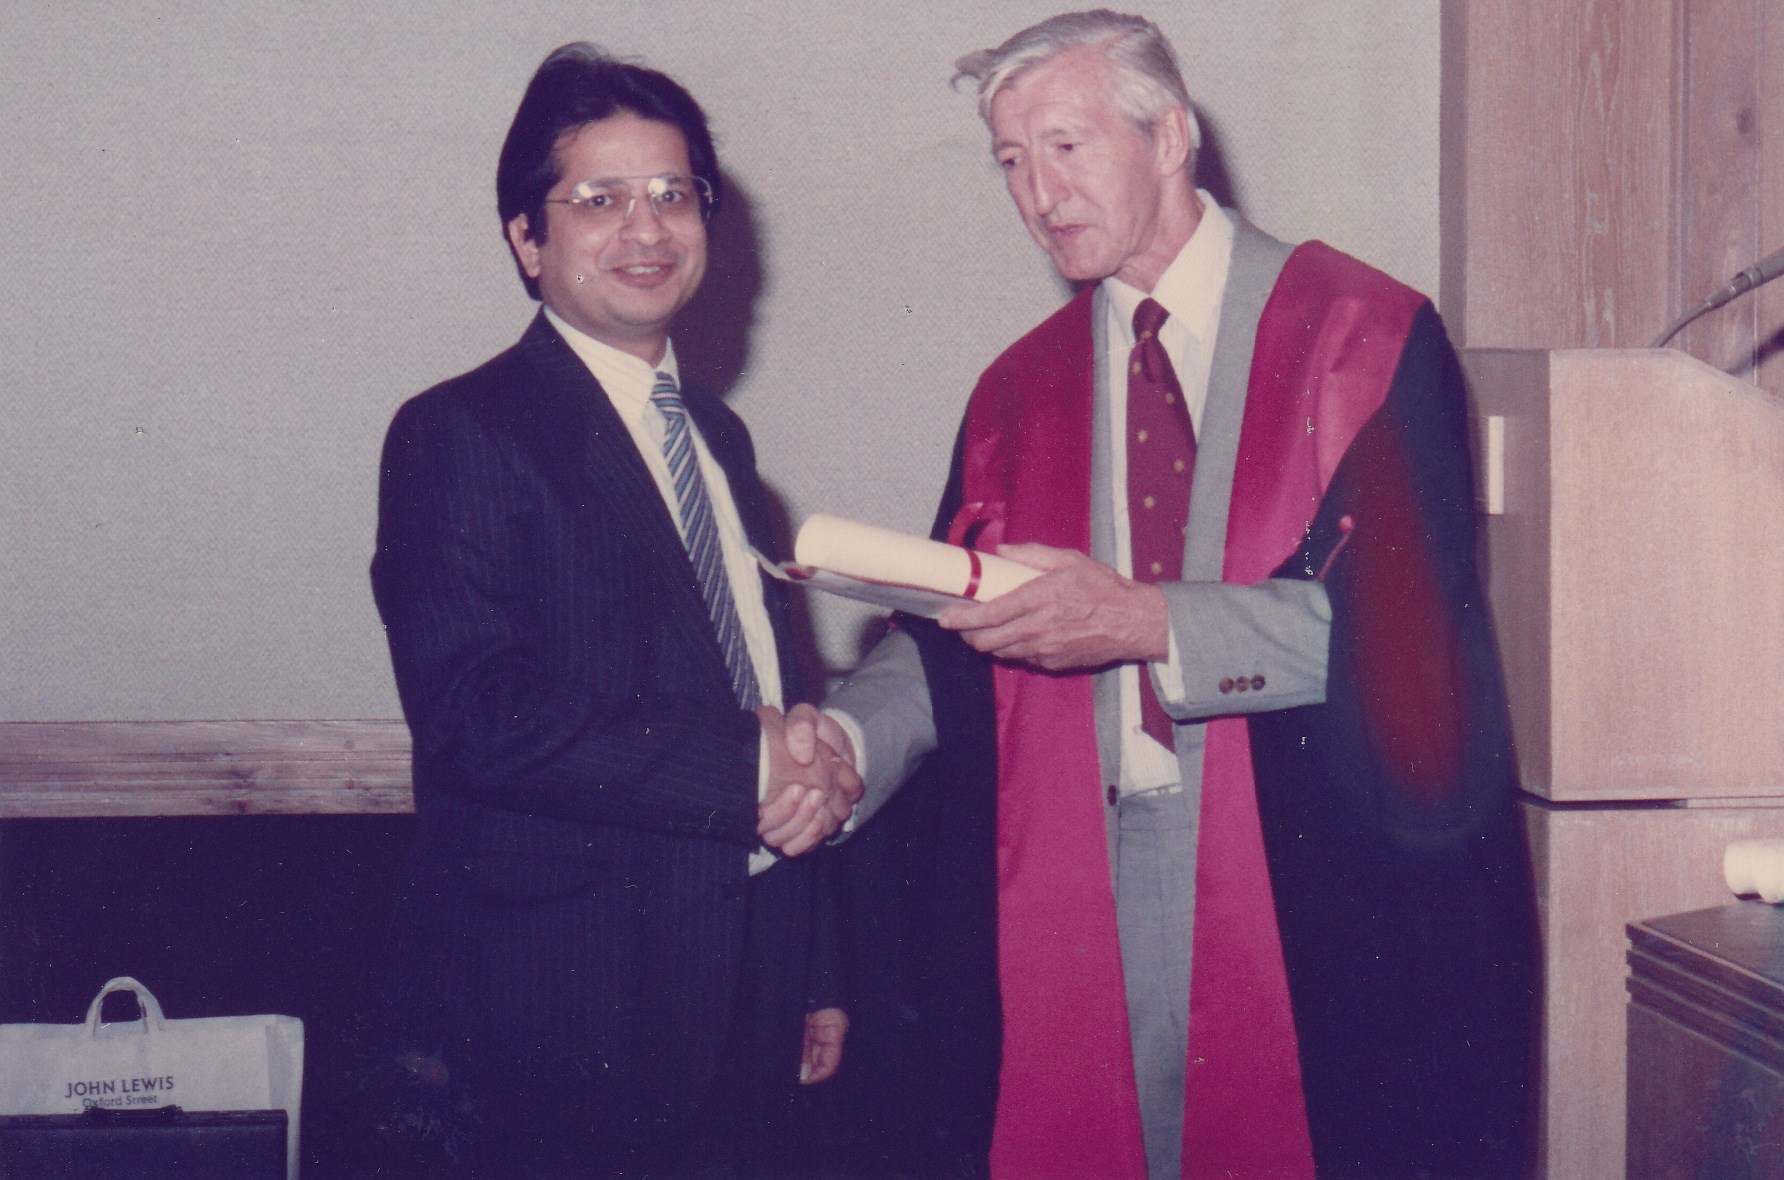 Receiving his PG degree in the UK.